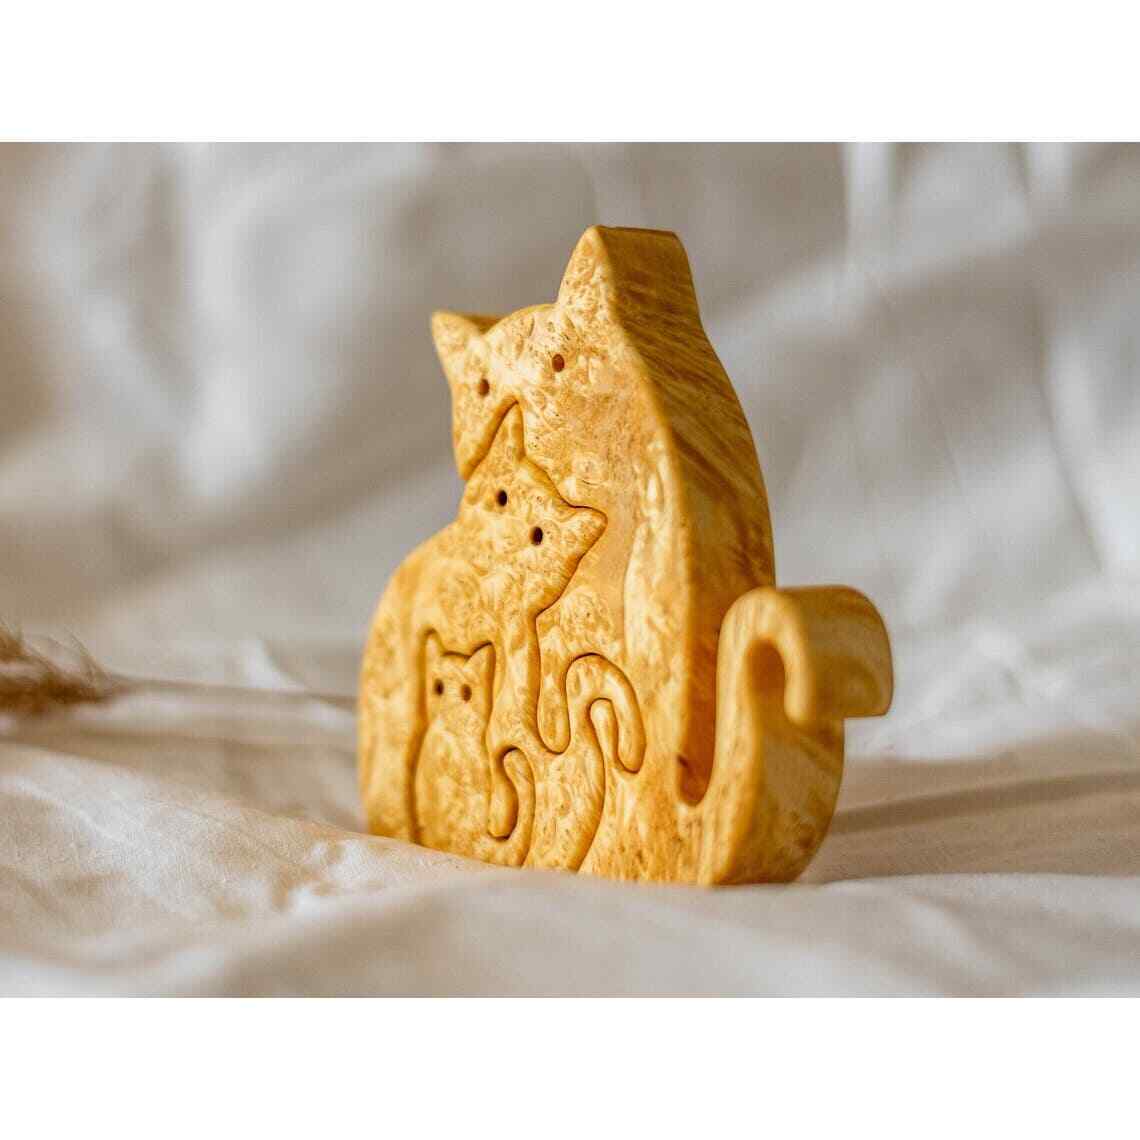 Handmade Carved Wooden Cat Family Puzzle Maple Burl Wood Unique Home Decor